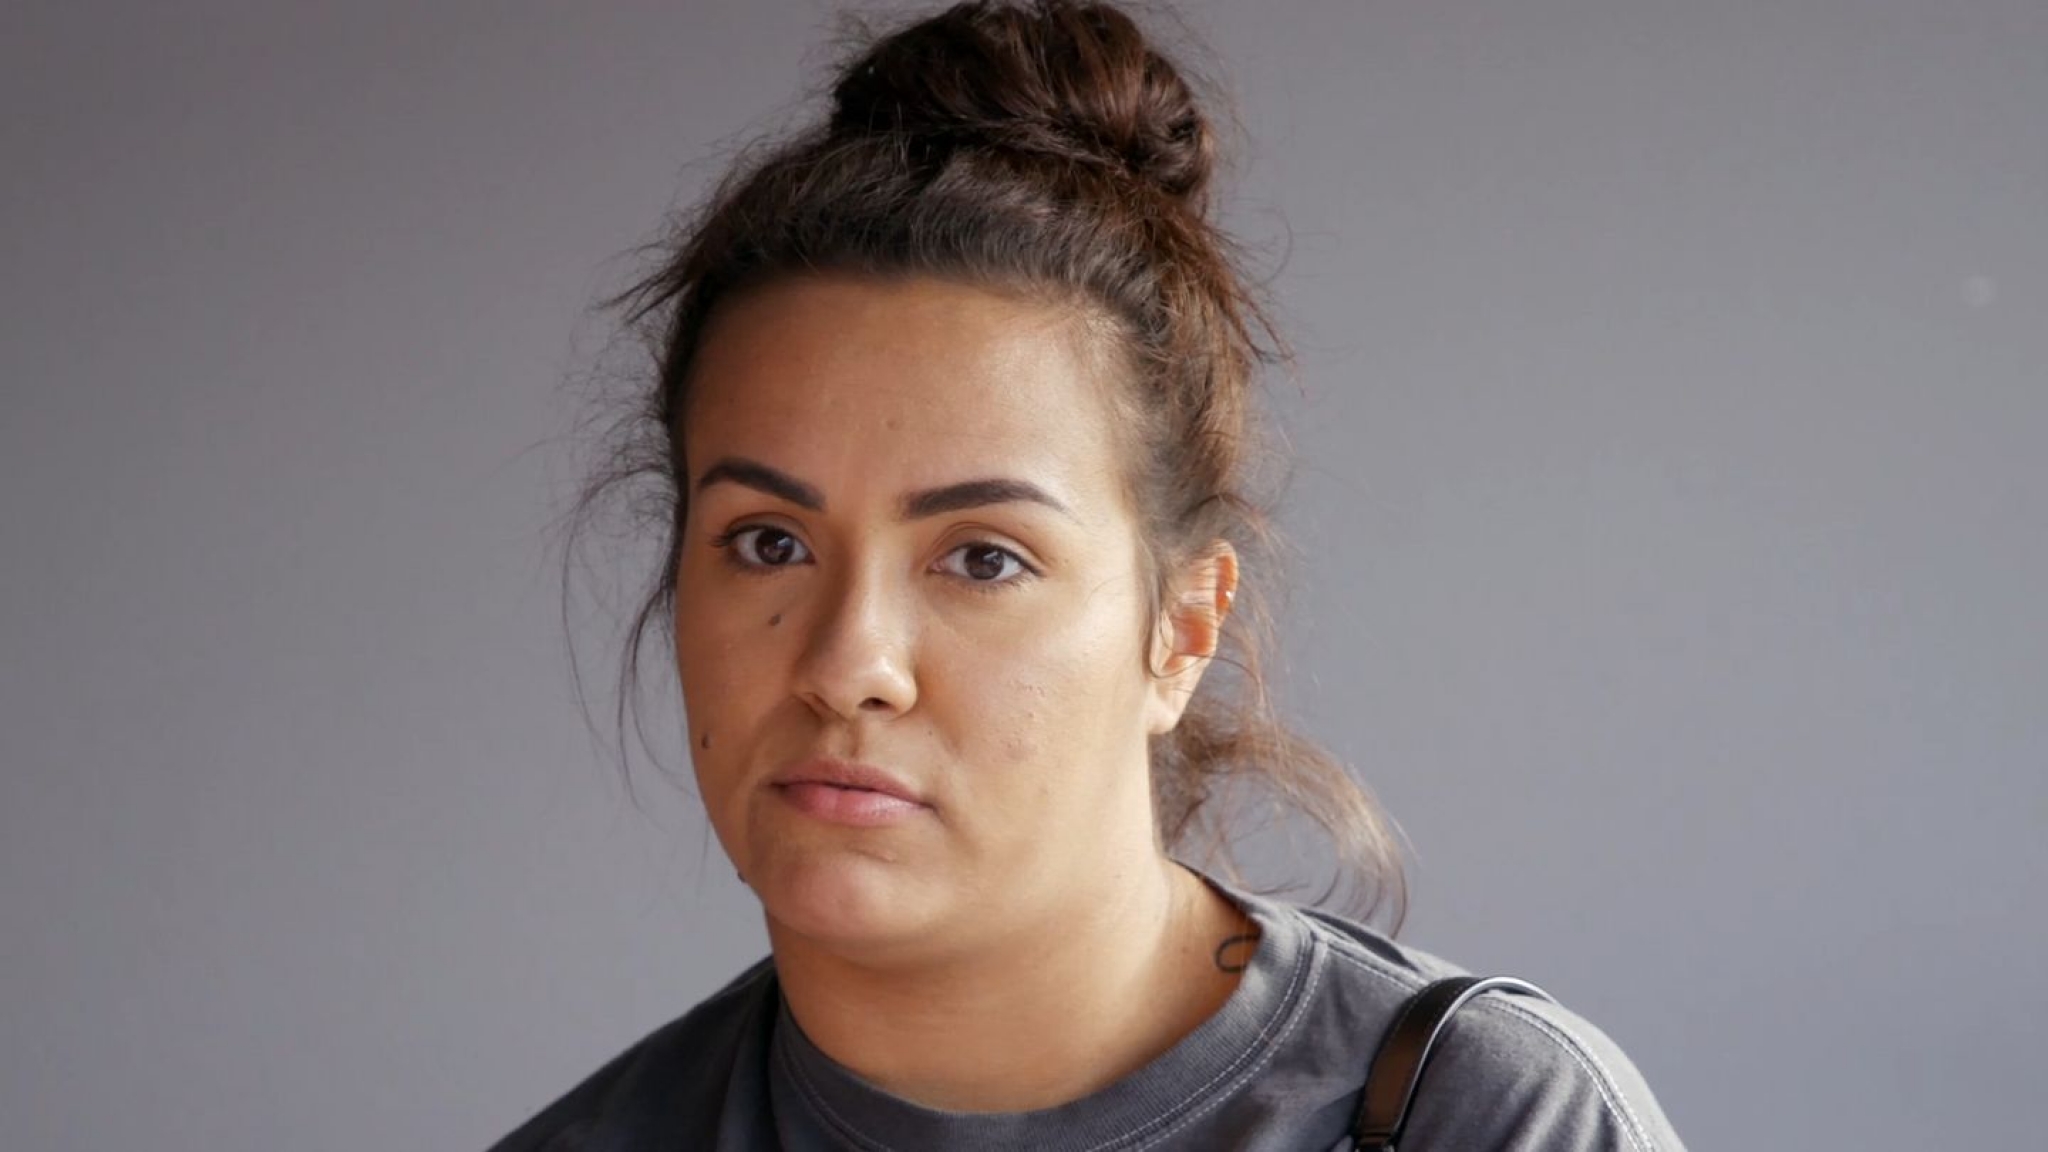 ‘I Failed Her’: Briana Makes A Sobering Teen Mom 2 Admission About Stella